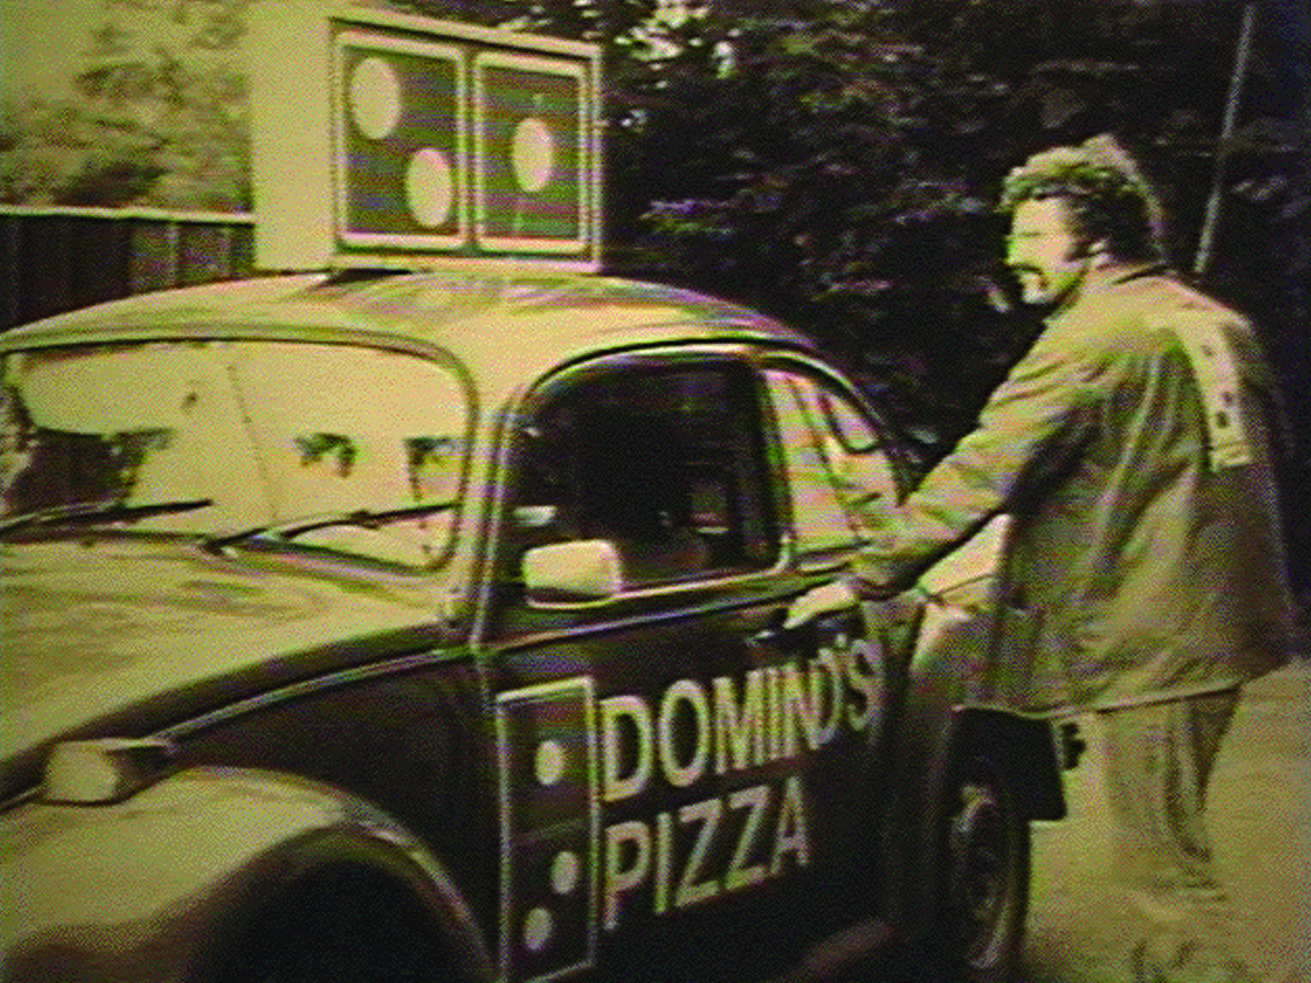 Domino’ started its delivery business with this Beetle.